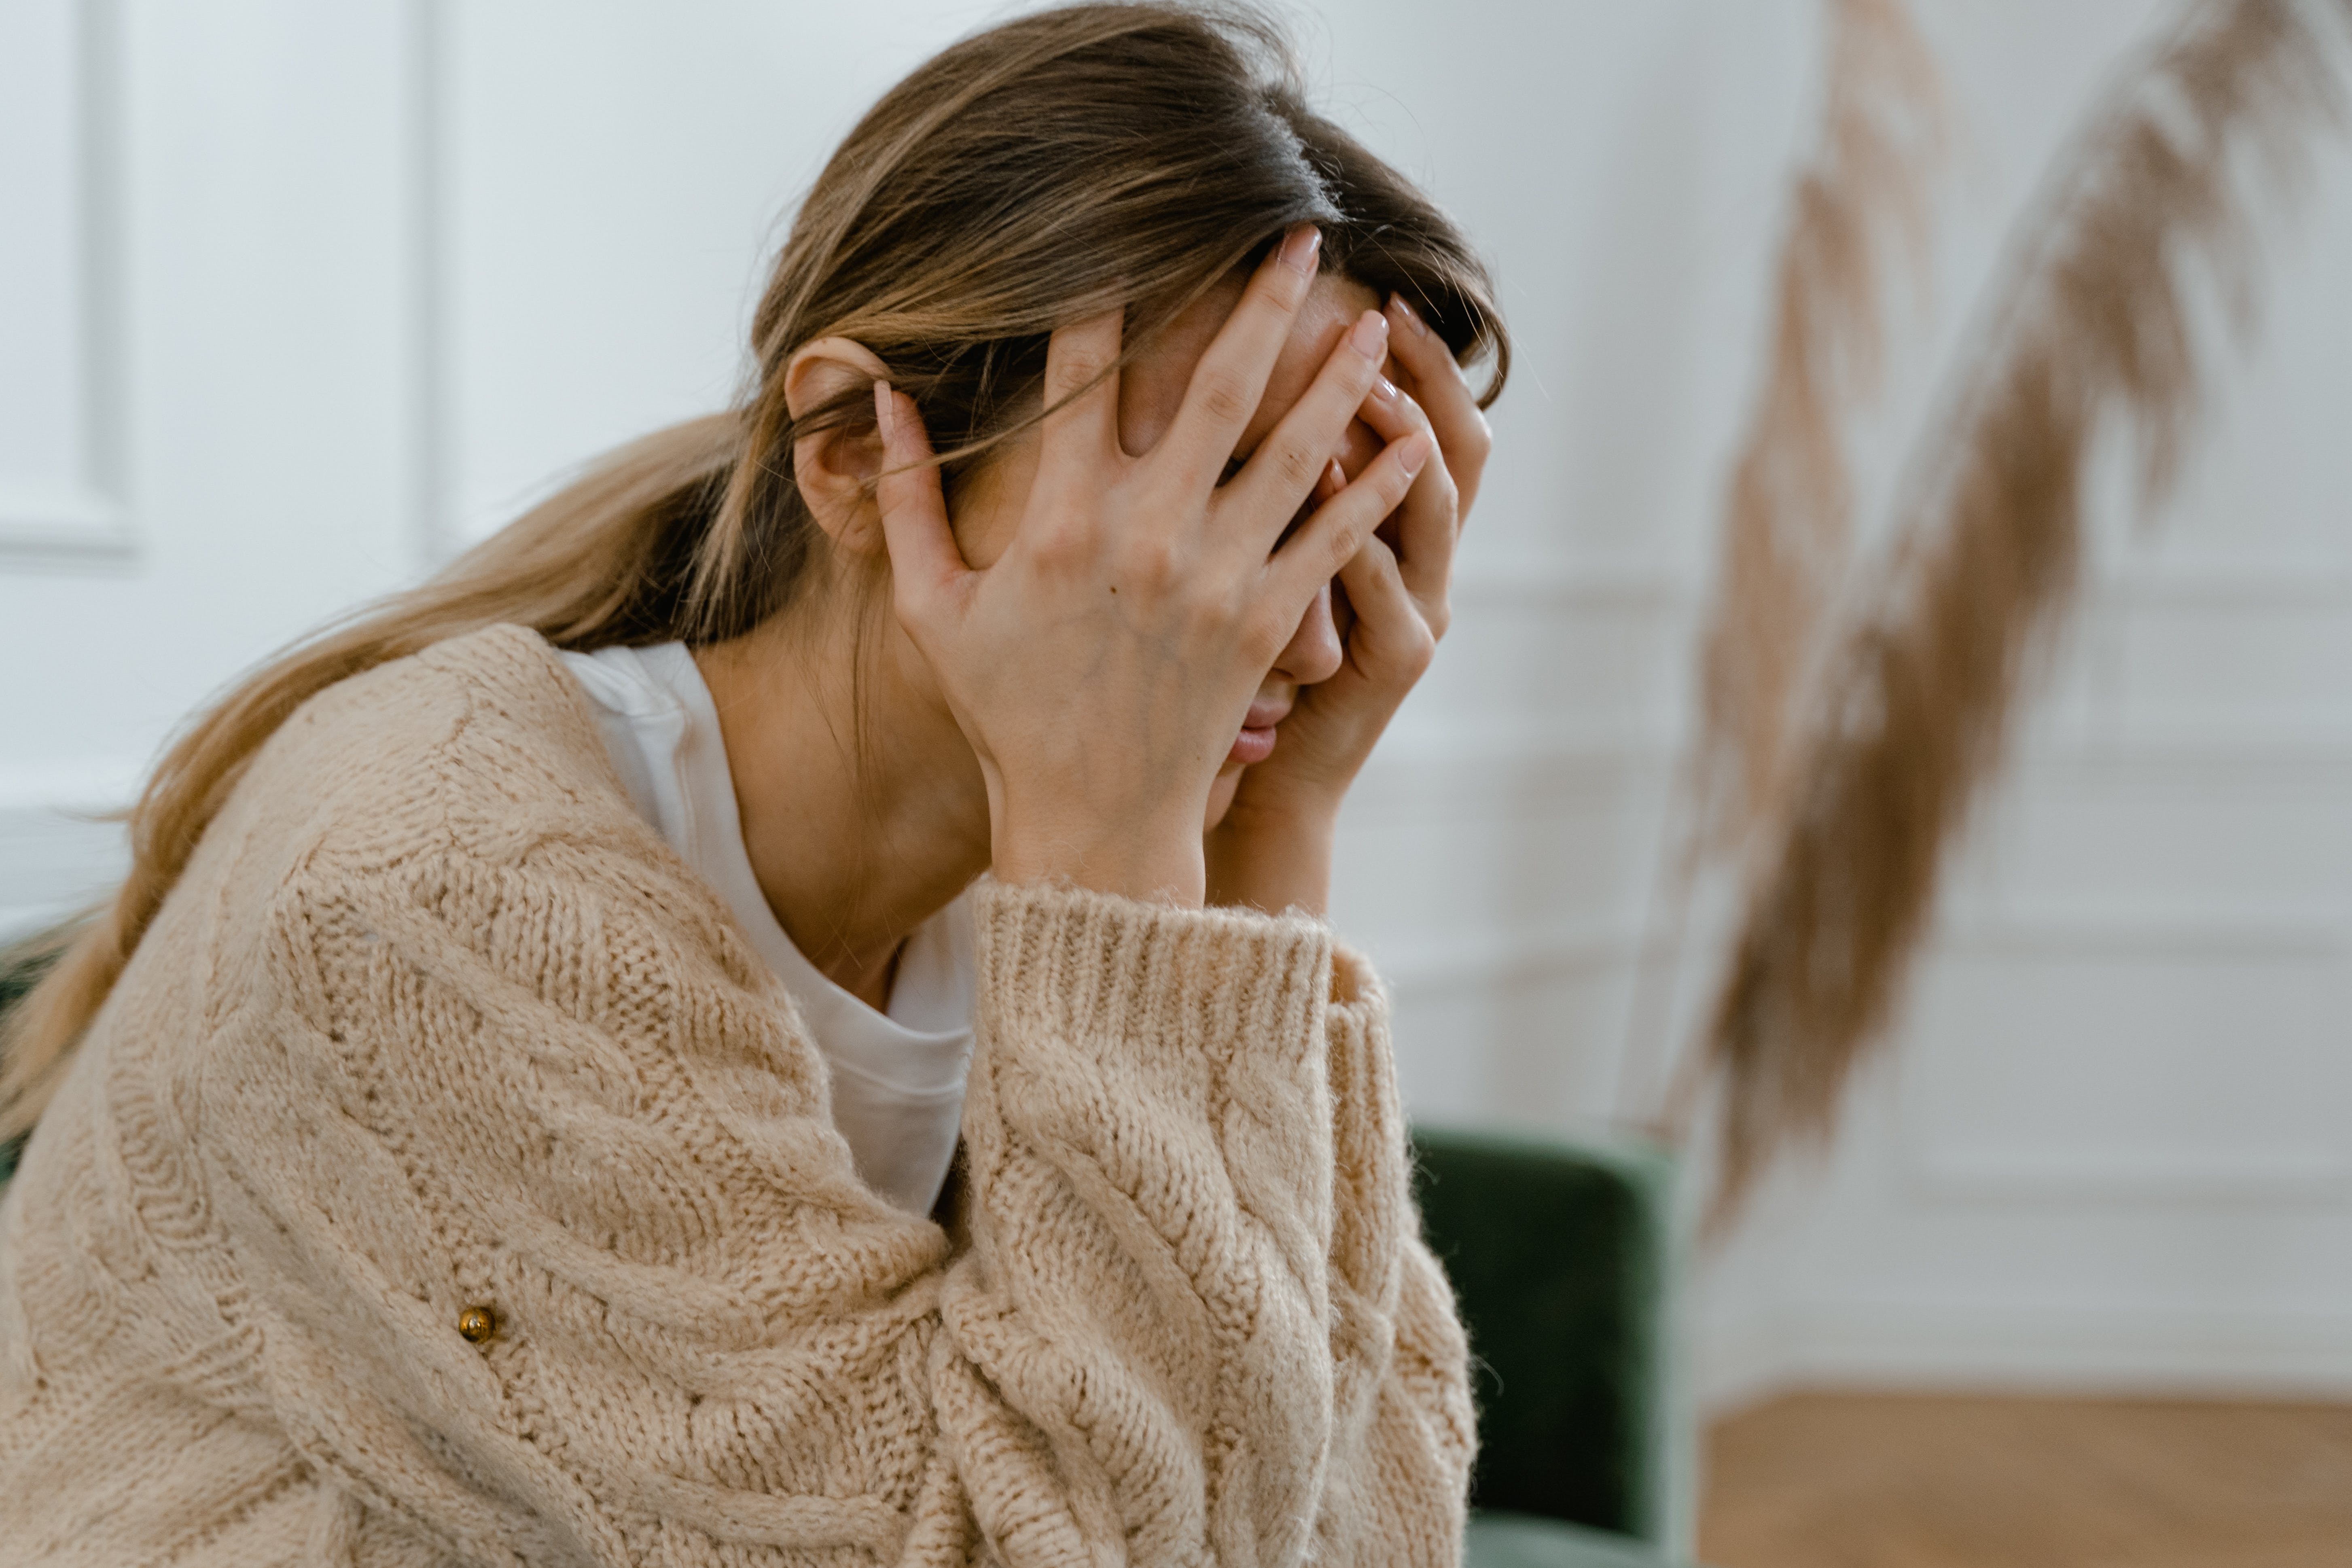 A stressed out woman sitting down while covering her face with her hands | Source: Pexels